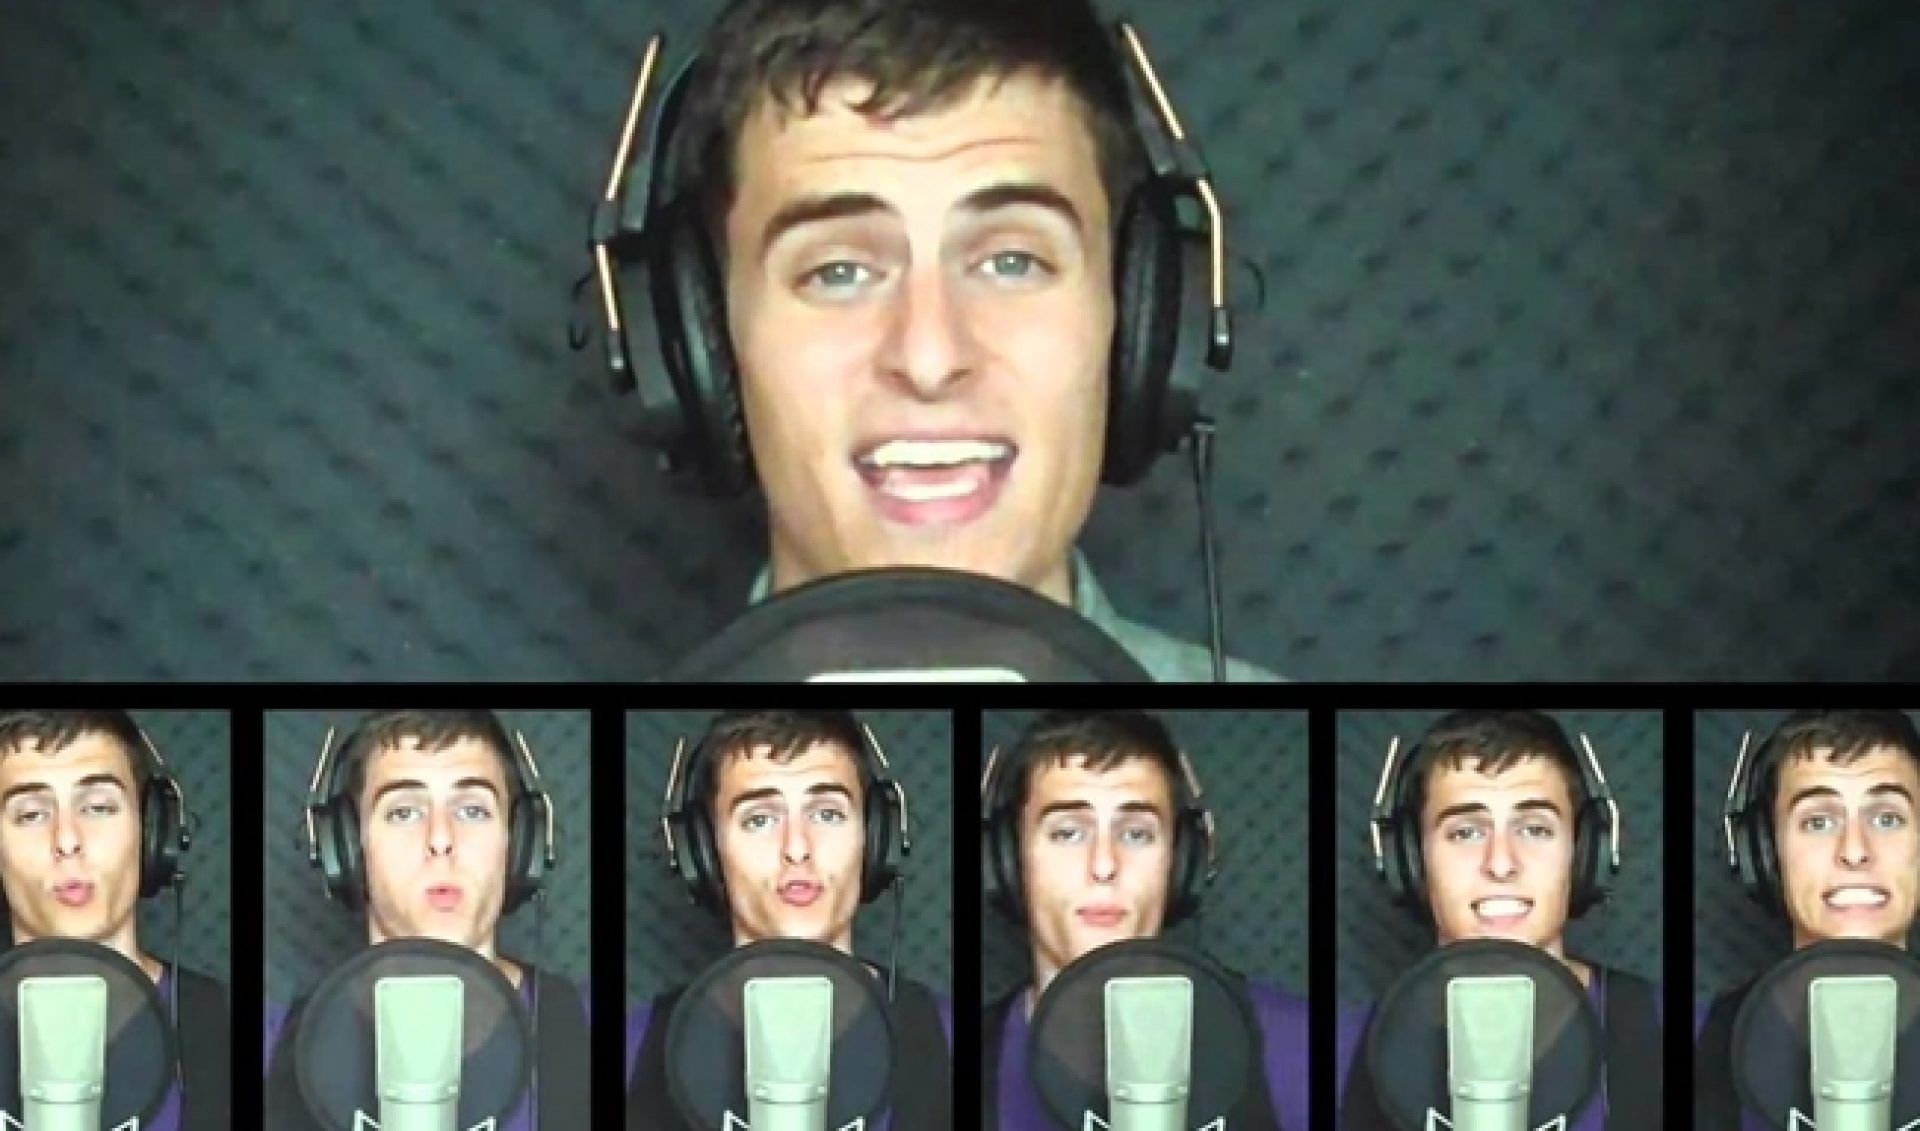 YouTube Millionaires: Mike Tompkins Uses His Voice Every Which Way